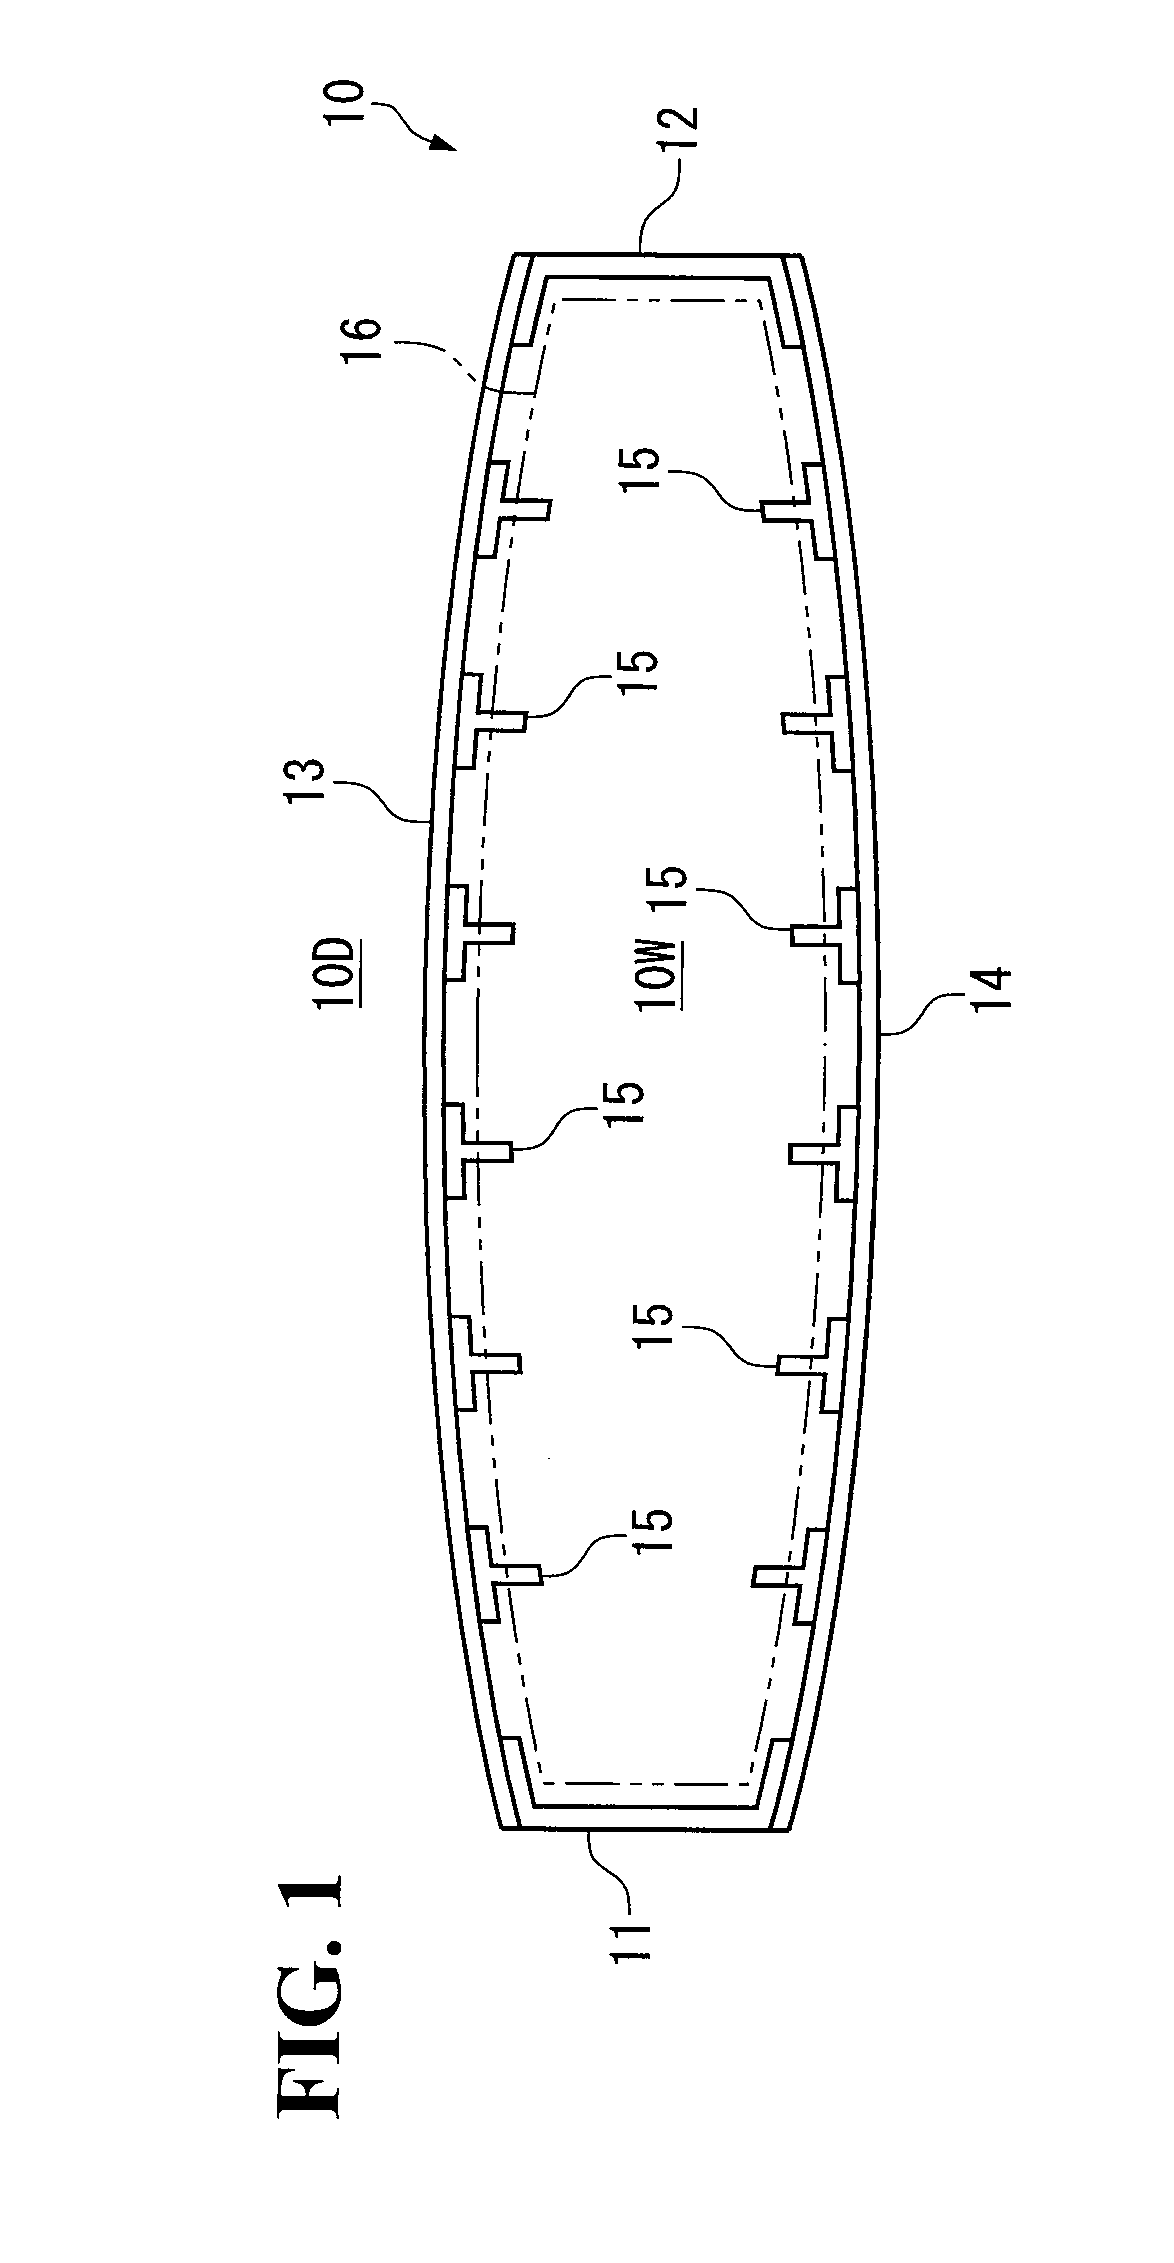 Method for determining object of aircraft lightning protection adequacy test and method for verifying lightning protection adequacy